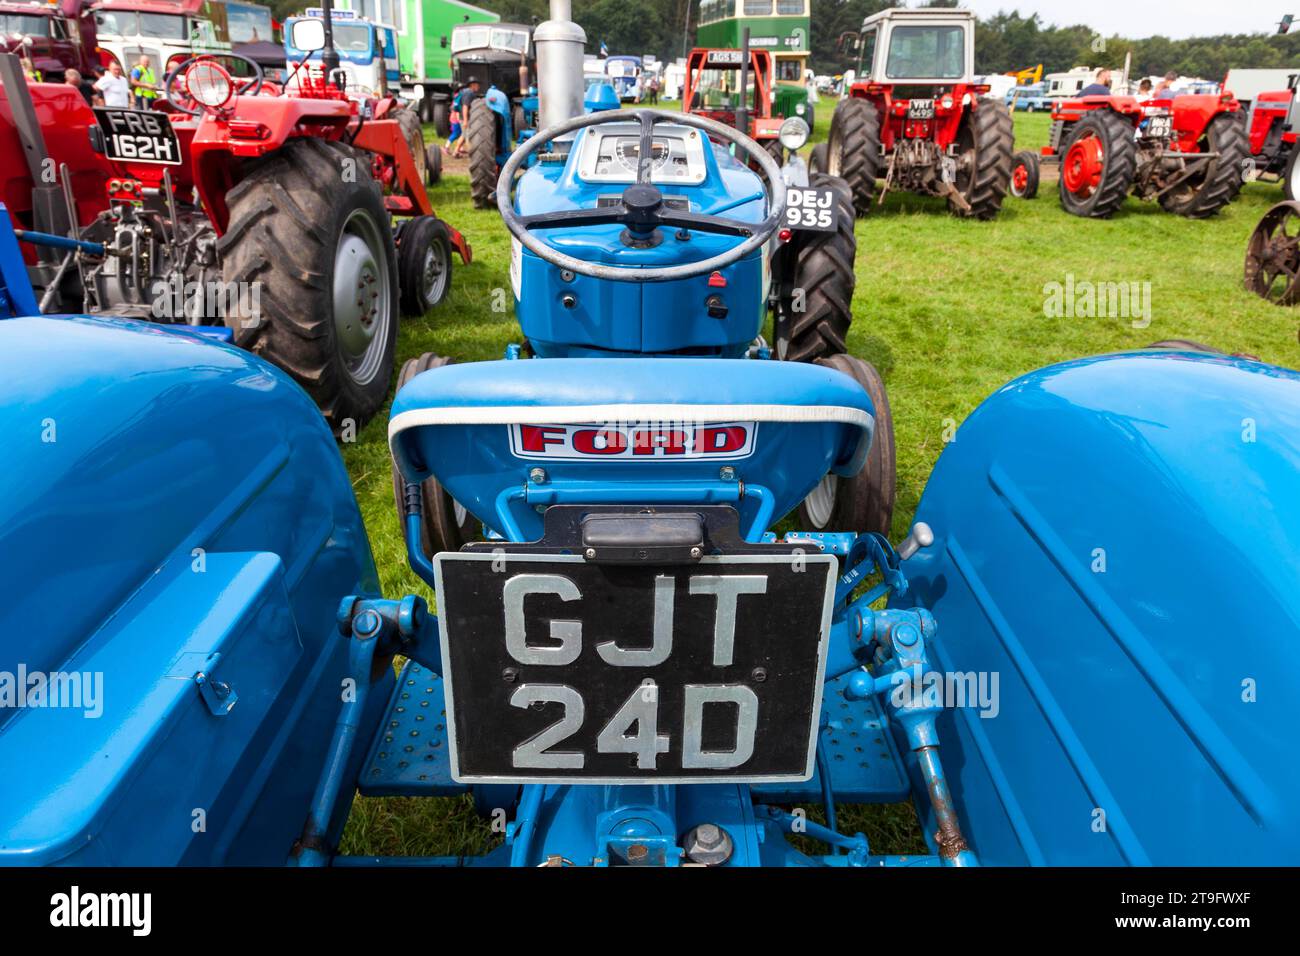 A vintage Ford tractor in the U.K. Stock Photo